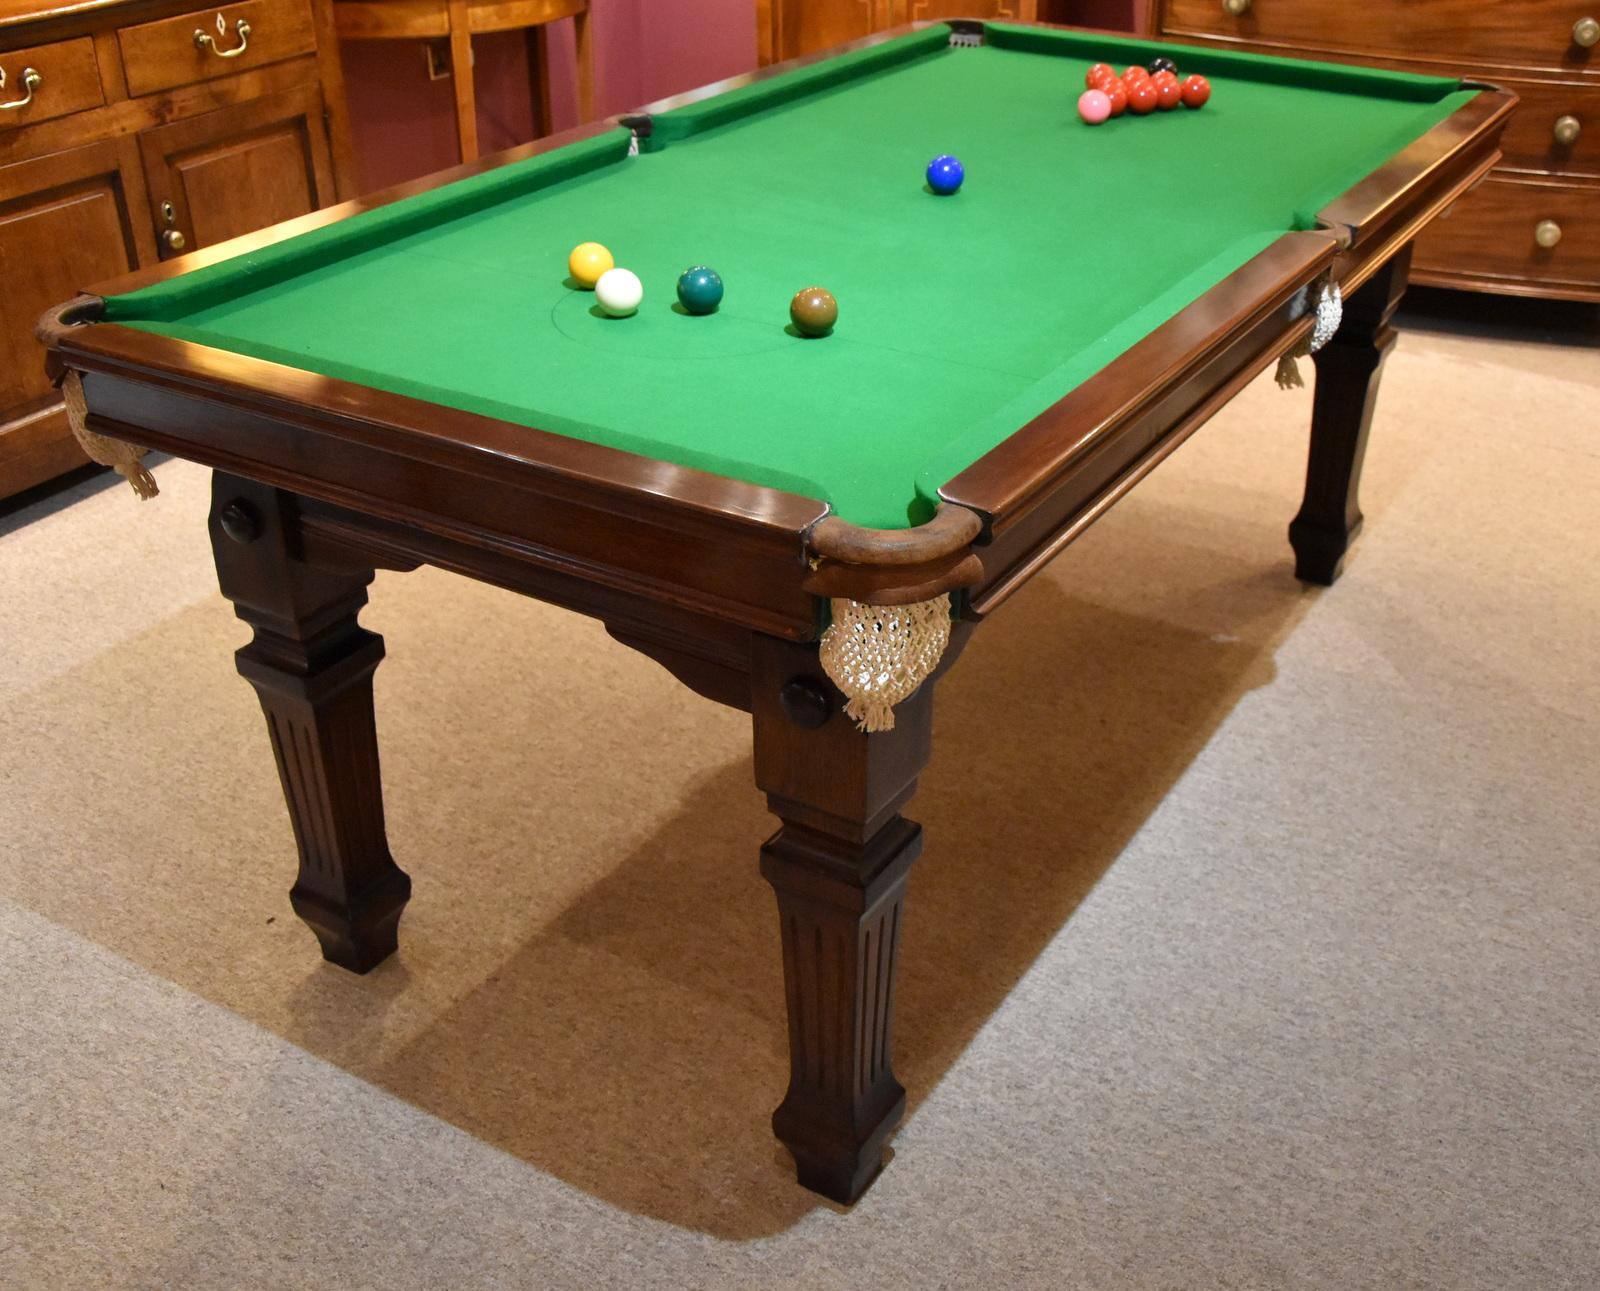 An elegant Edwardian metamorphic snooker table by Riley and sons turning into a dining table

Measures: Height 33